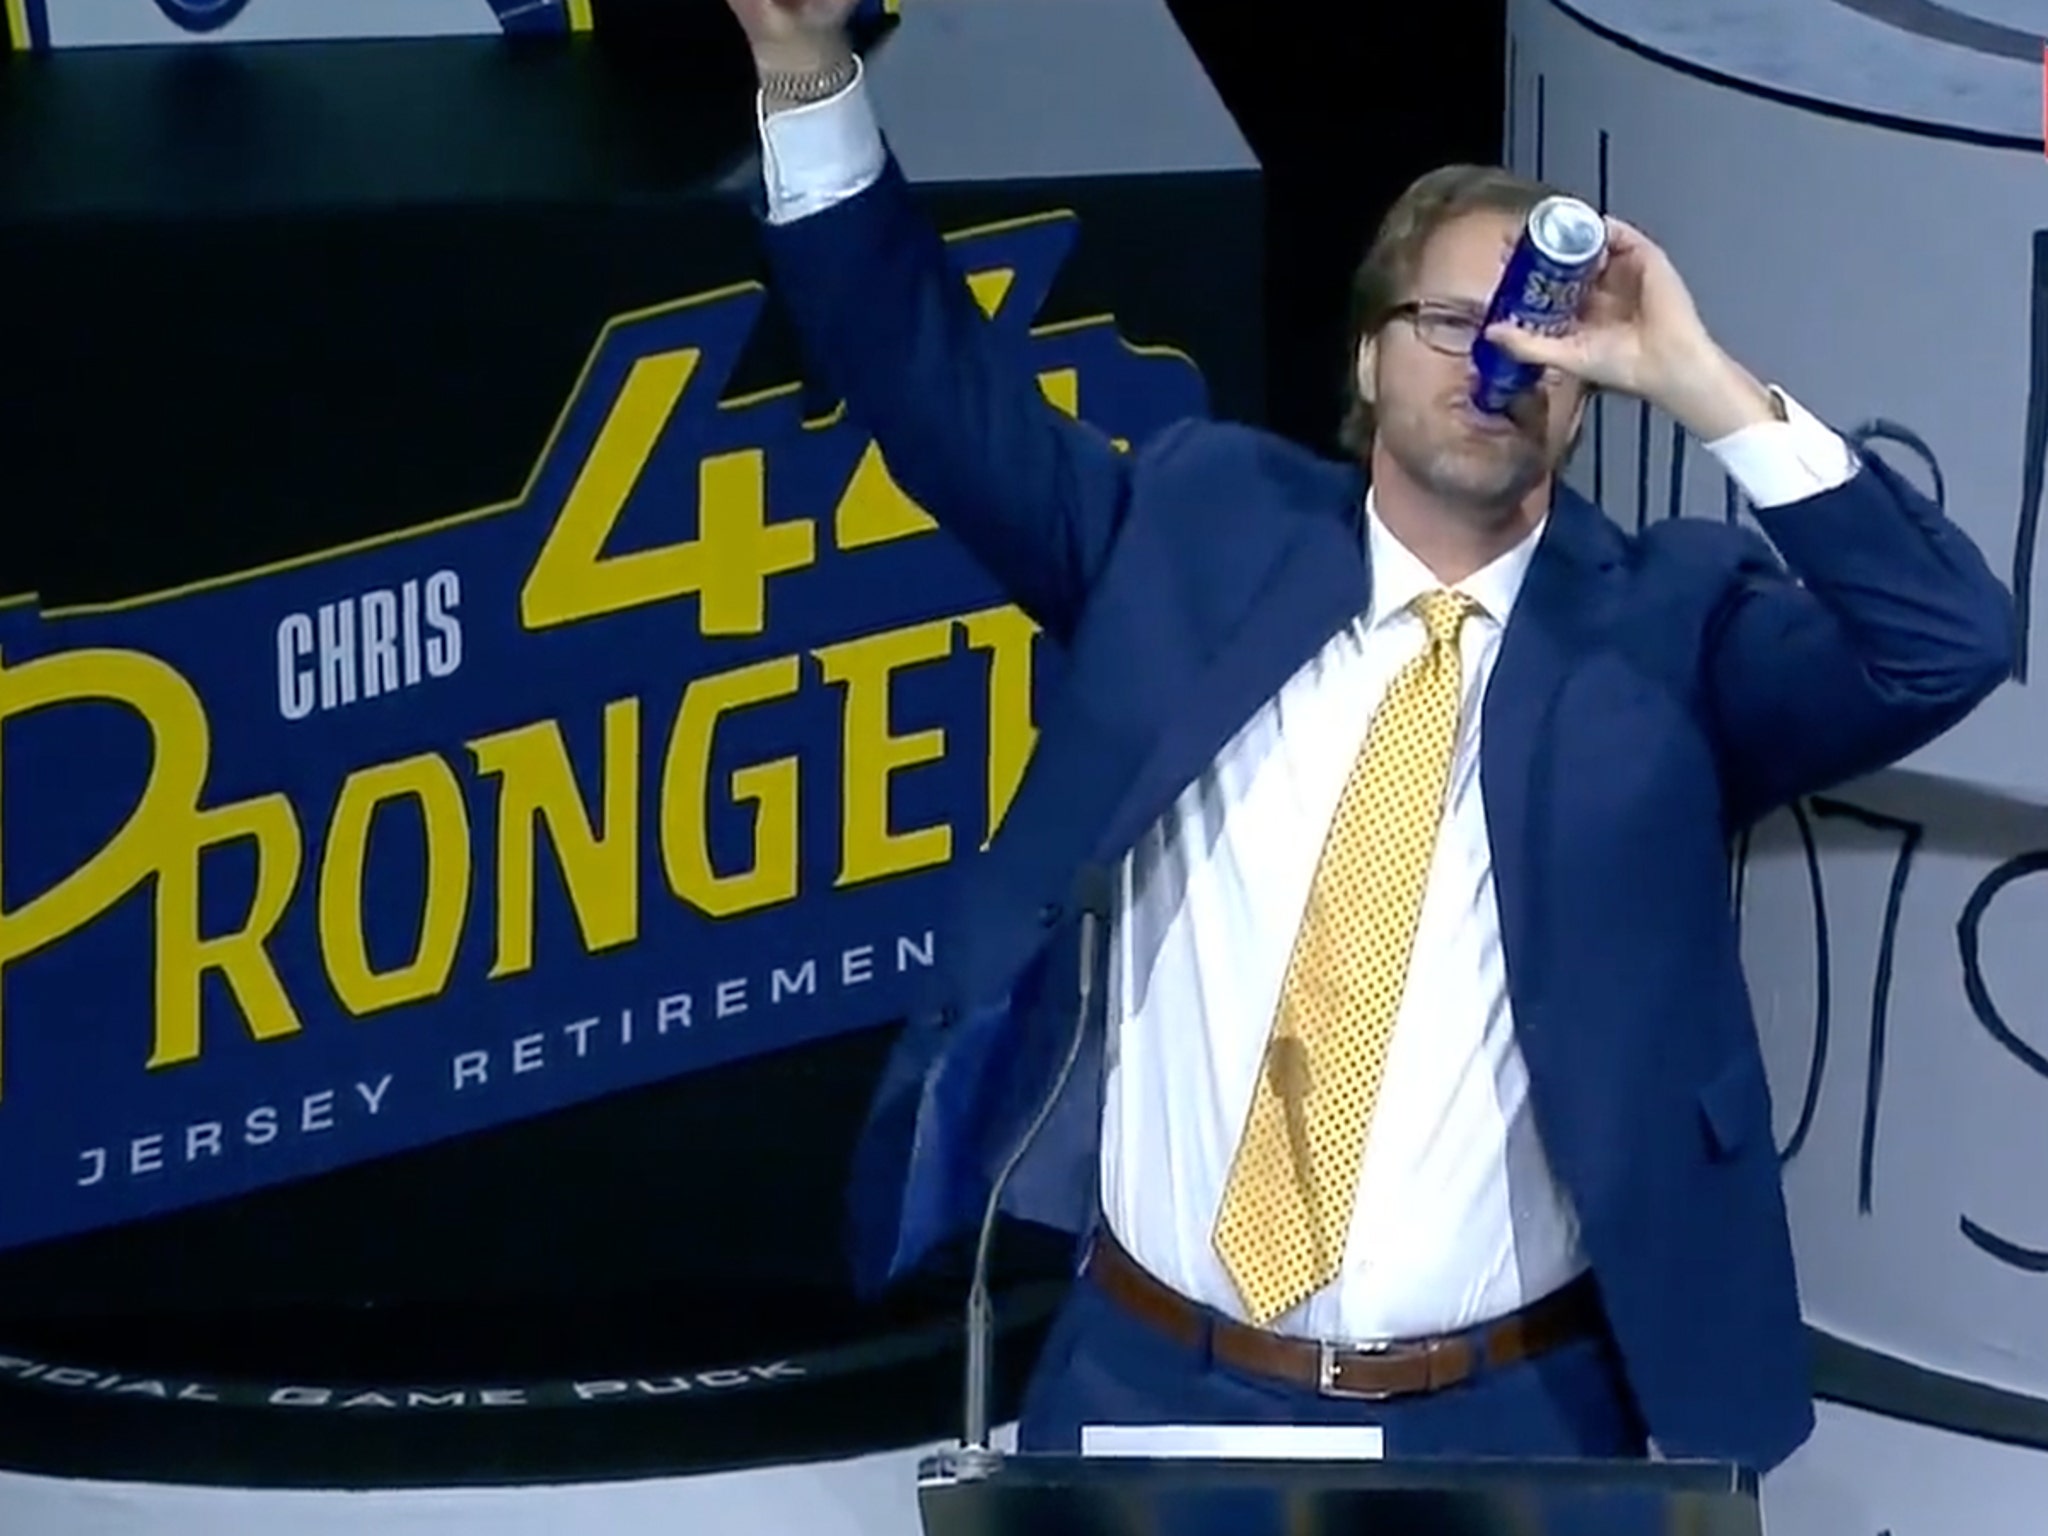 Not in Hall of Fame - 11. Chris Pronger